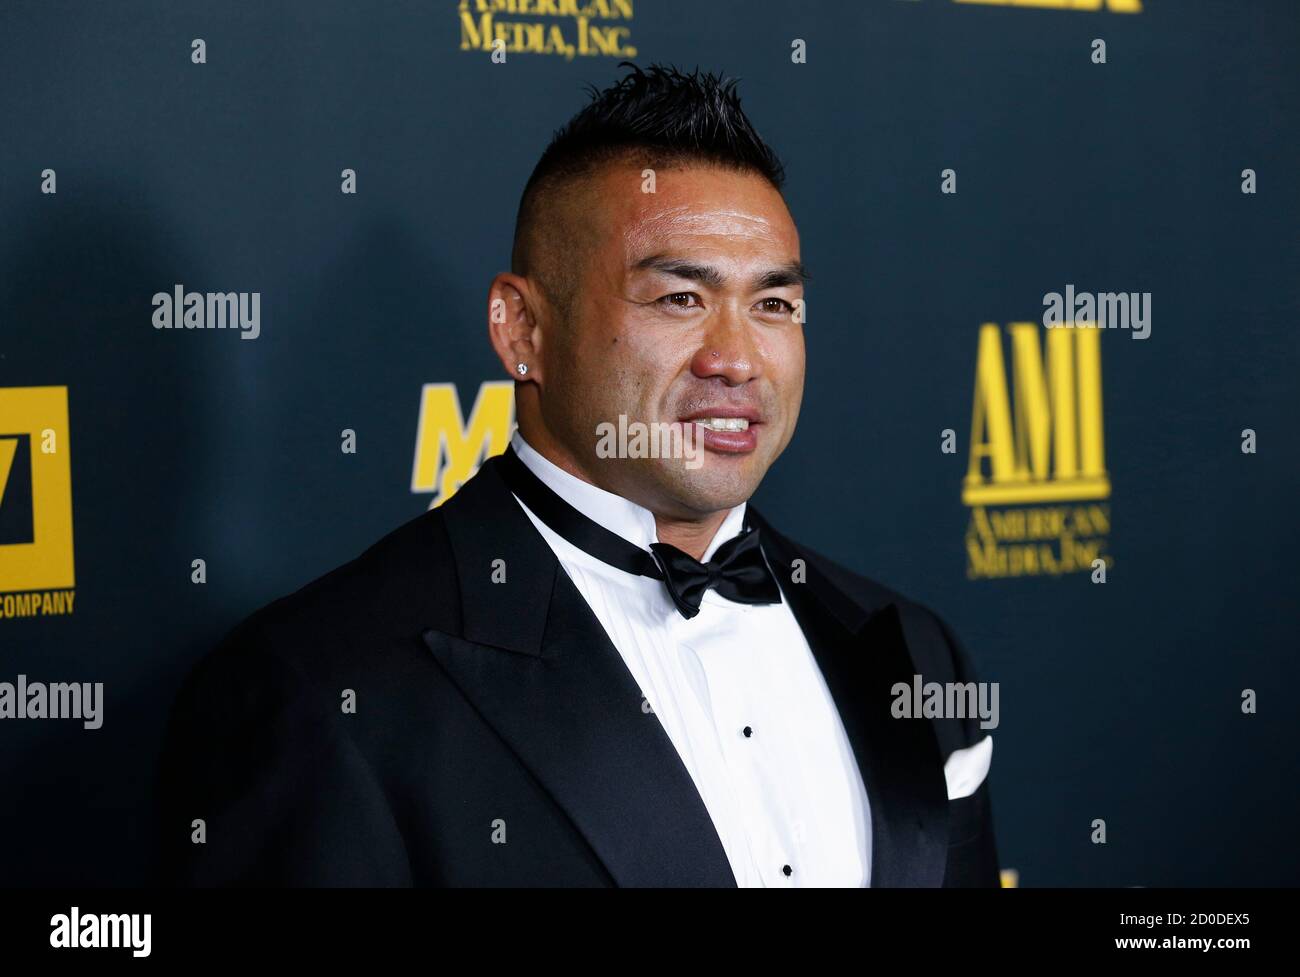 Professional bodybuilder Hidetada Yamagishi poses at the Los Angeles premiere of the documentary film 'Generation Iron' in Hollywood, California September 18, 2013. The film examines the professional sport of bodybuilding today. REUTERS/Danny Moloshok (UNITED STATES - Tags: ENTERTAINMENT HEADSHOT SPORT) Stock Photo